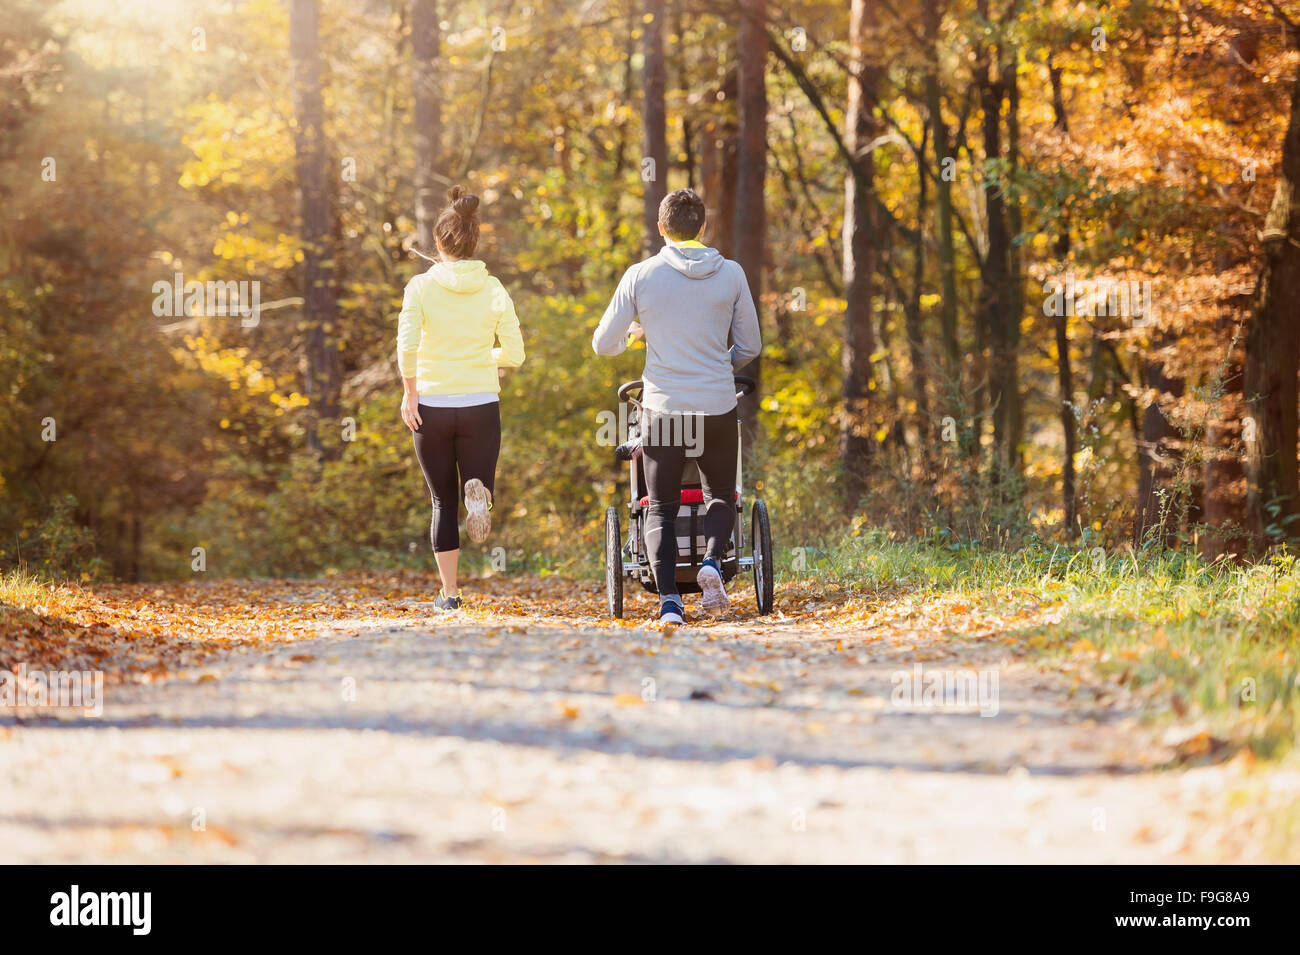 Beautiful young family with baby in jogging stroller running outside in autumn nature Stock Photo